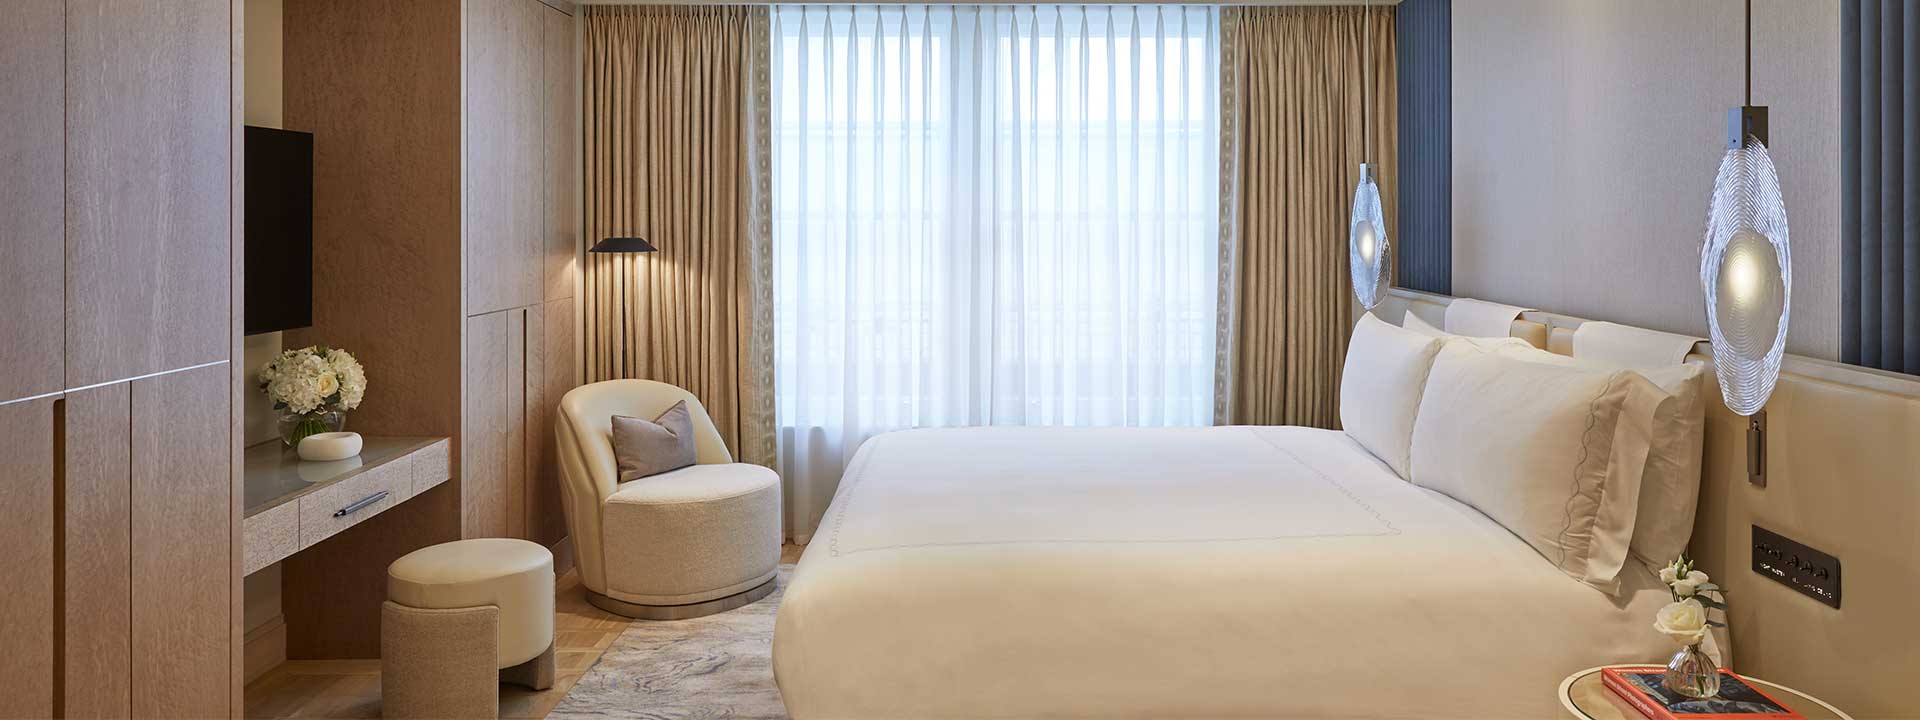 A bed and an armchair in the Mayfair Room, in a champagne-coloured interior with a subtle design.